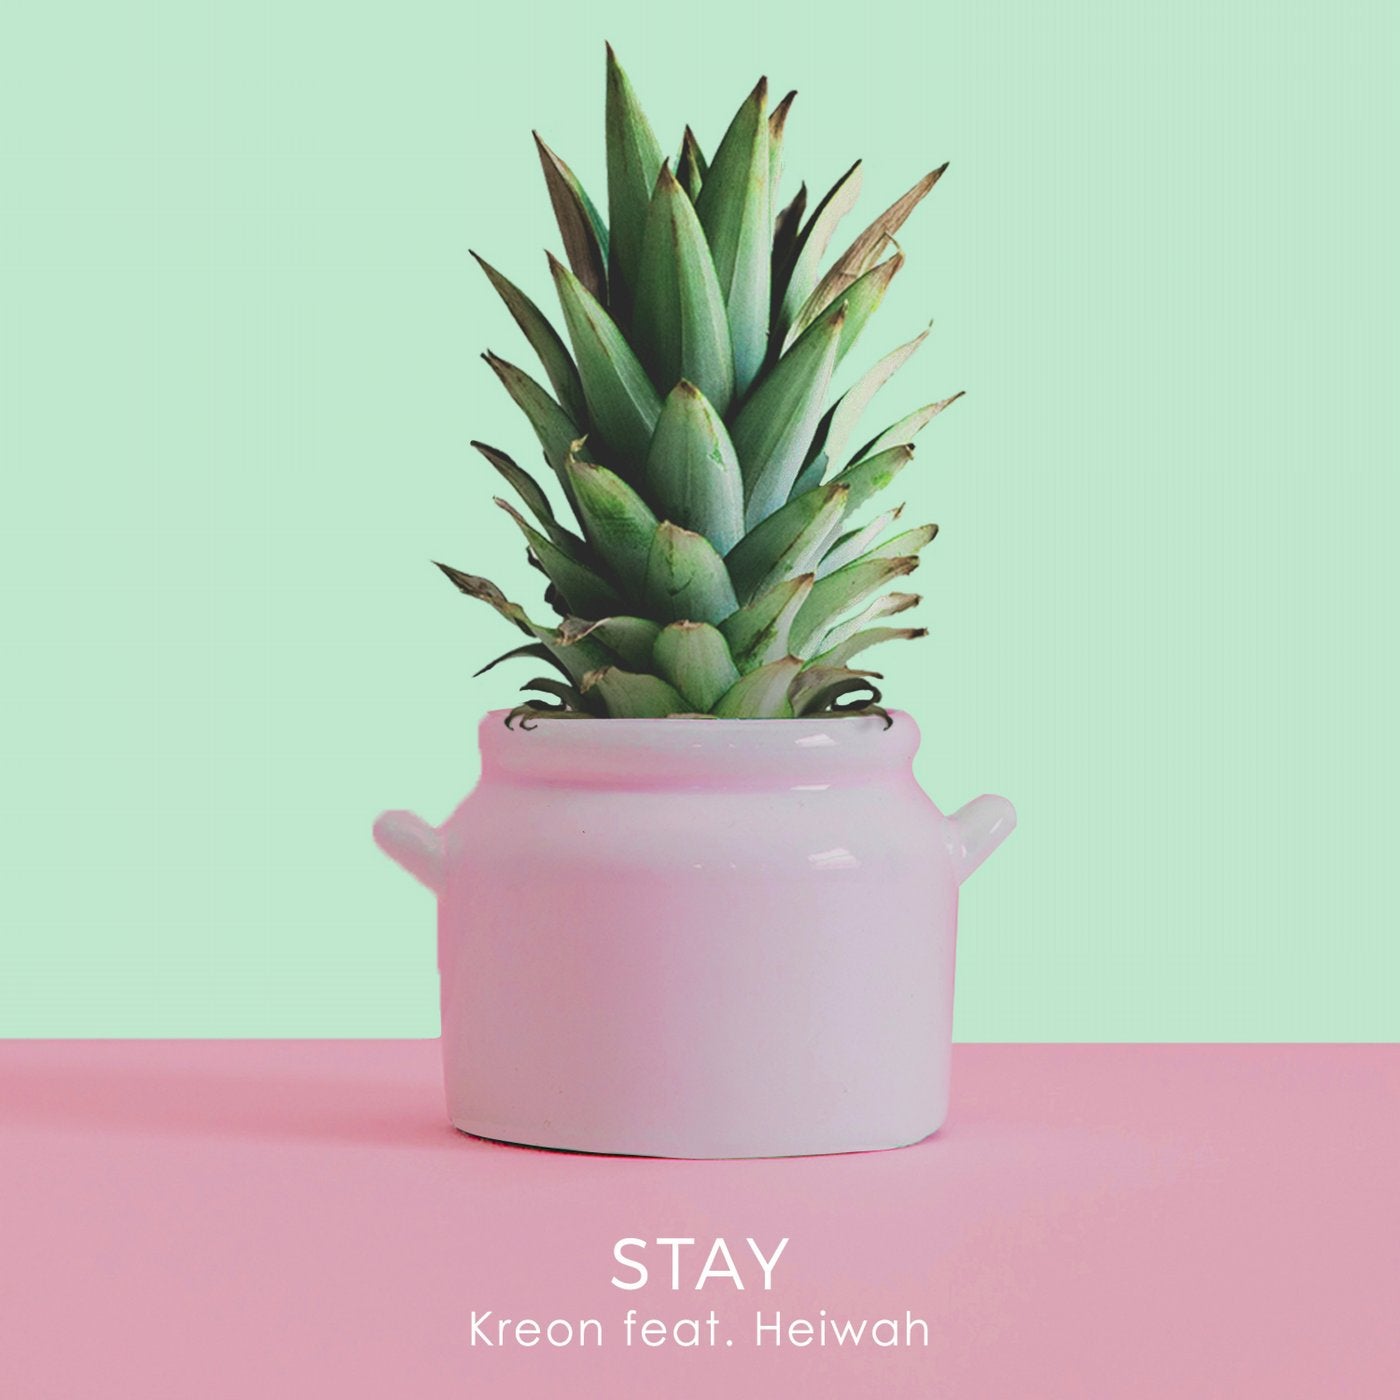 Stay (feat. Heiwah)